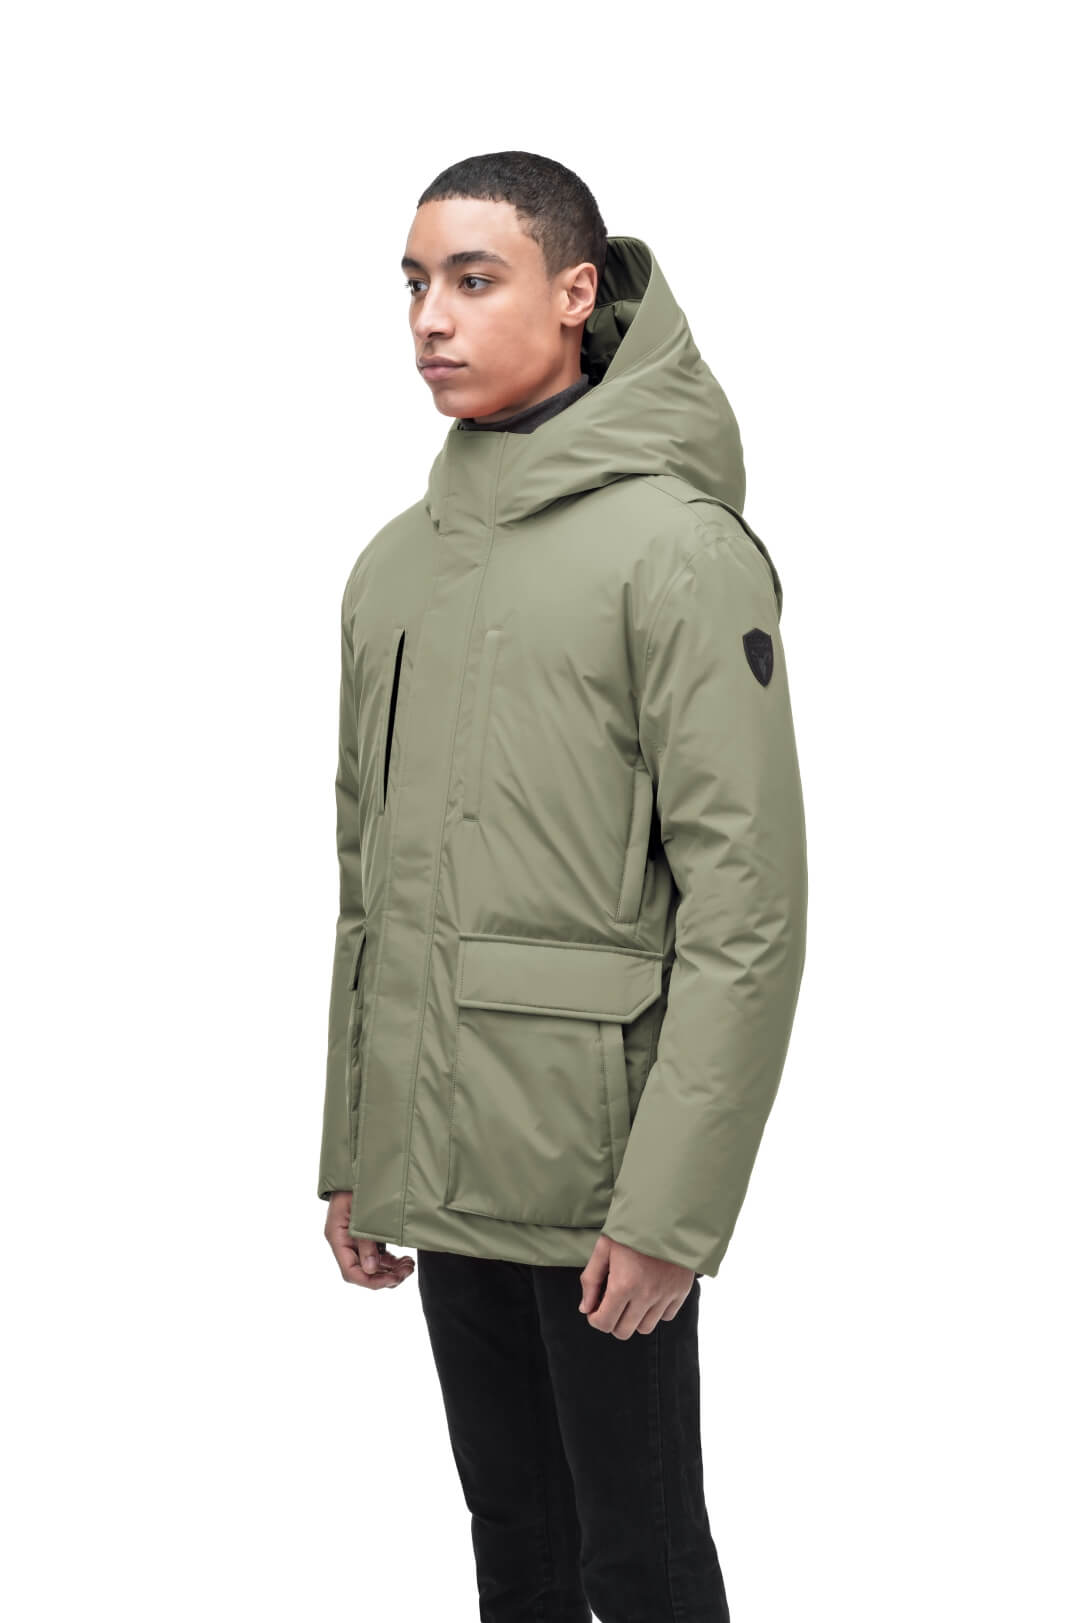 Geo Men's Short Parka in hip length, Canadian duck down insulation, non-removable hood, and two-way zipper, in Clover